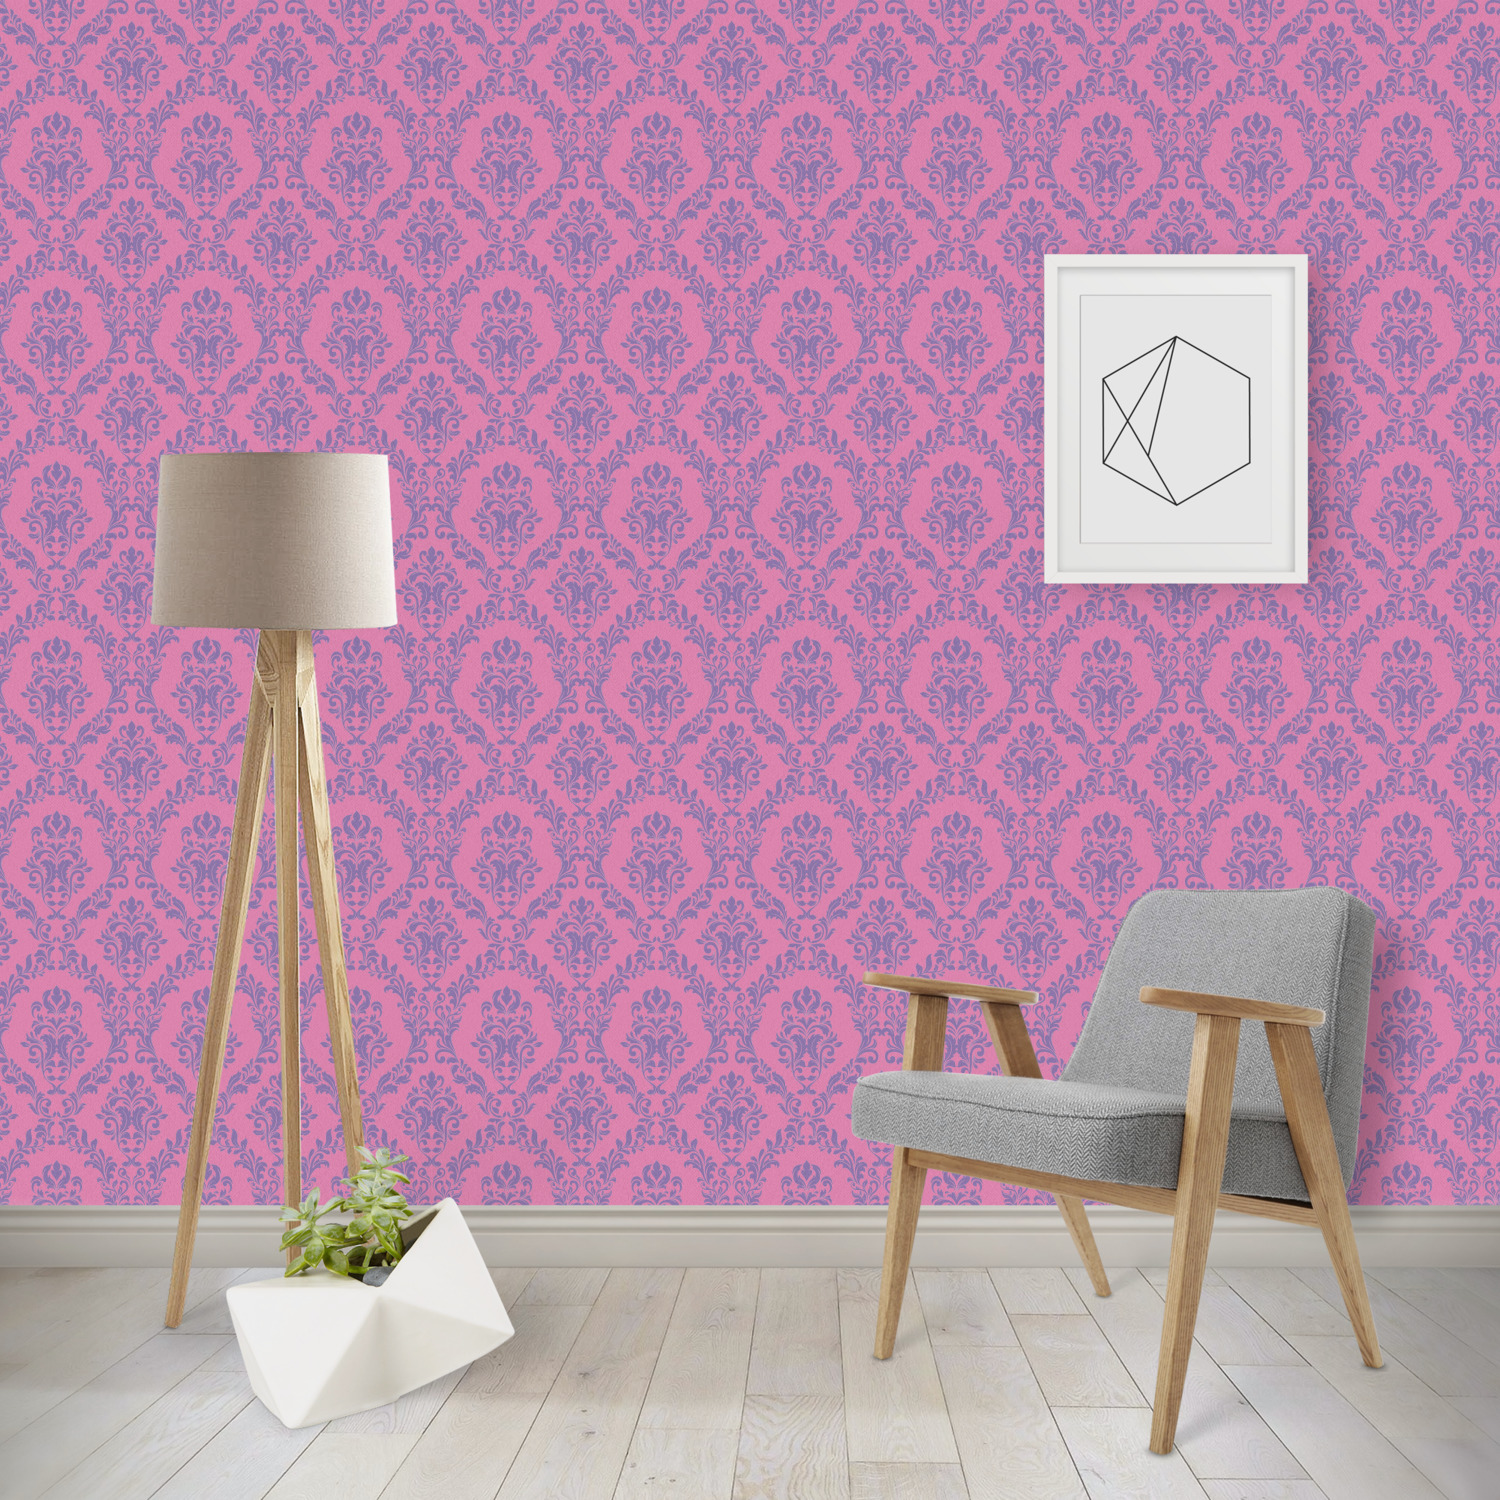 Pink & Purple Damask Wallpaper & Surface Covering - YouCustomizeIt